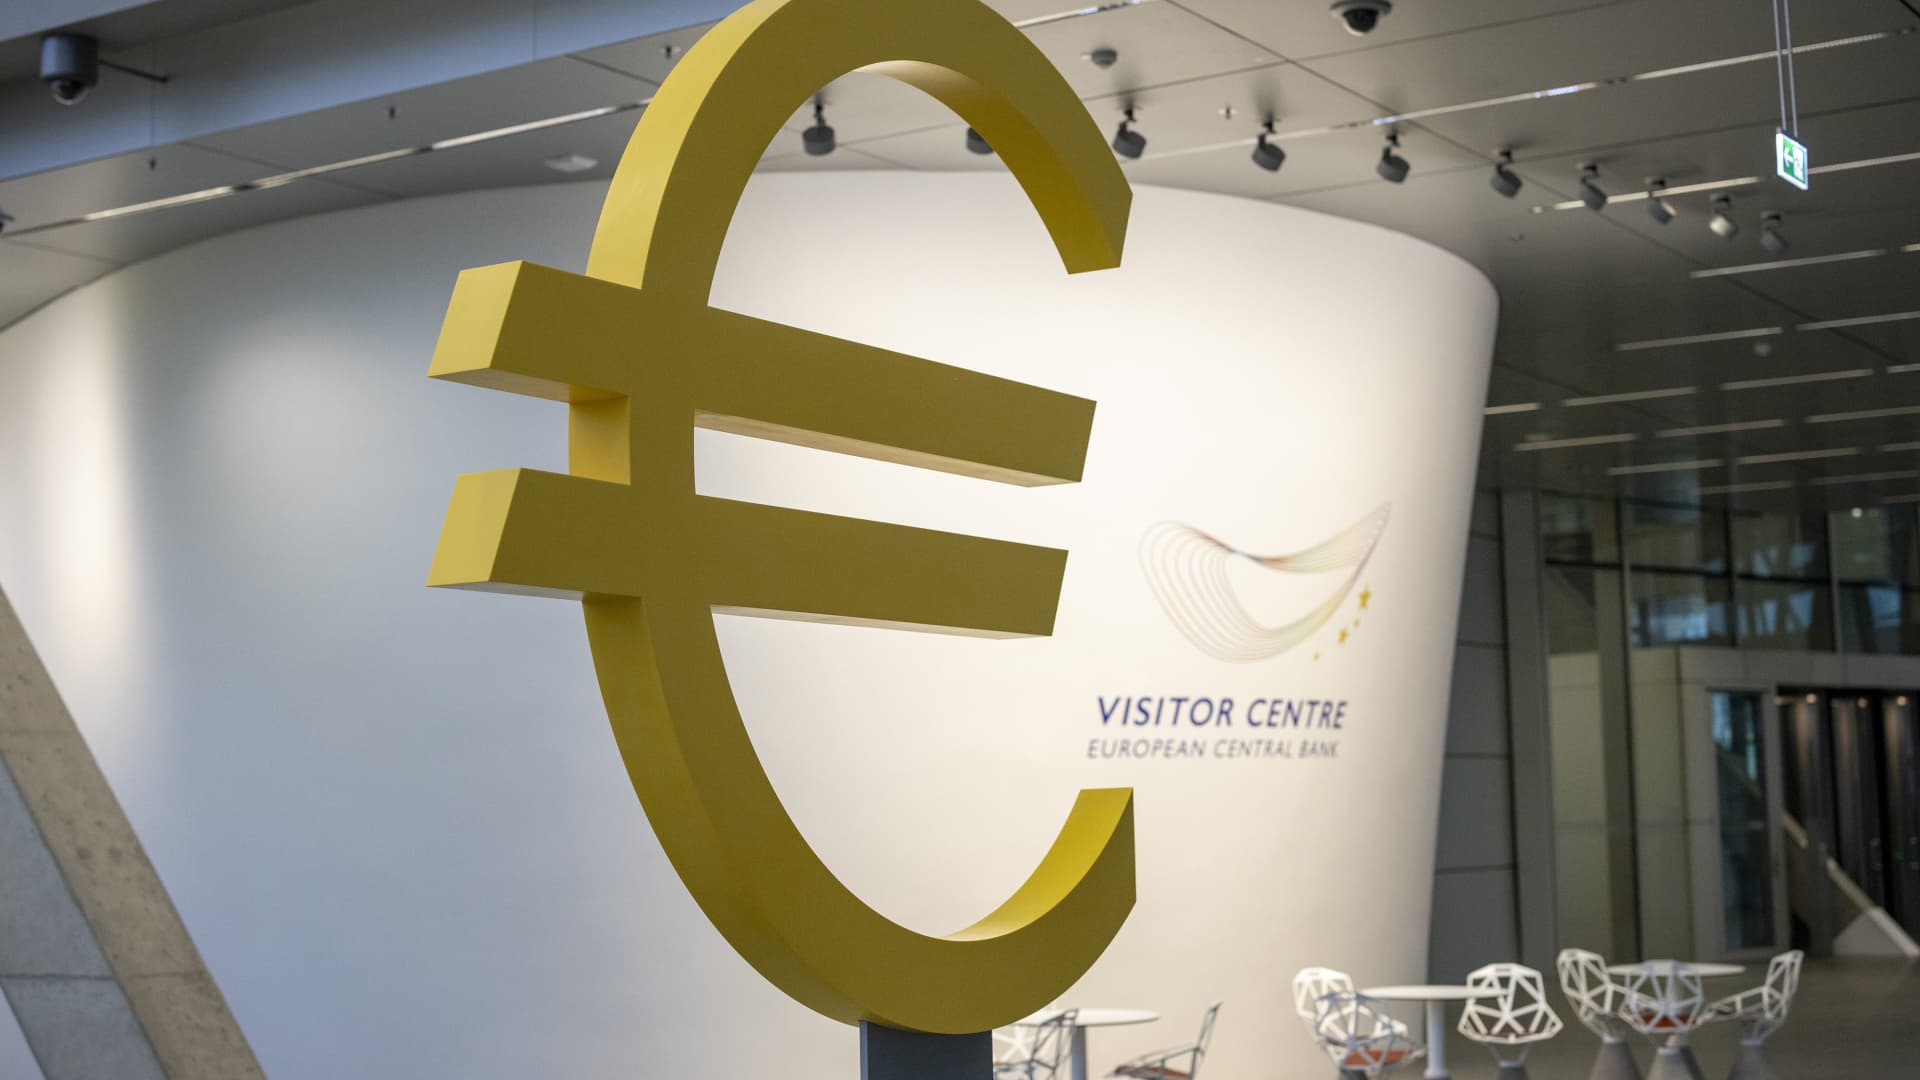 A euro currency symbol sits on display in the visitor centre at the European Central Bank (ECB) building in Frankfurt, Germany.